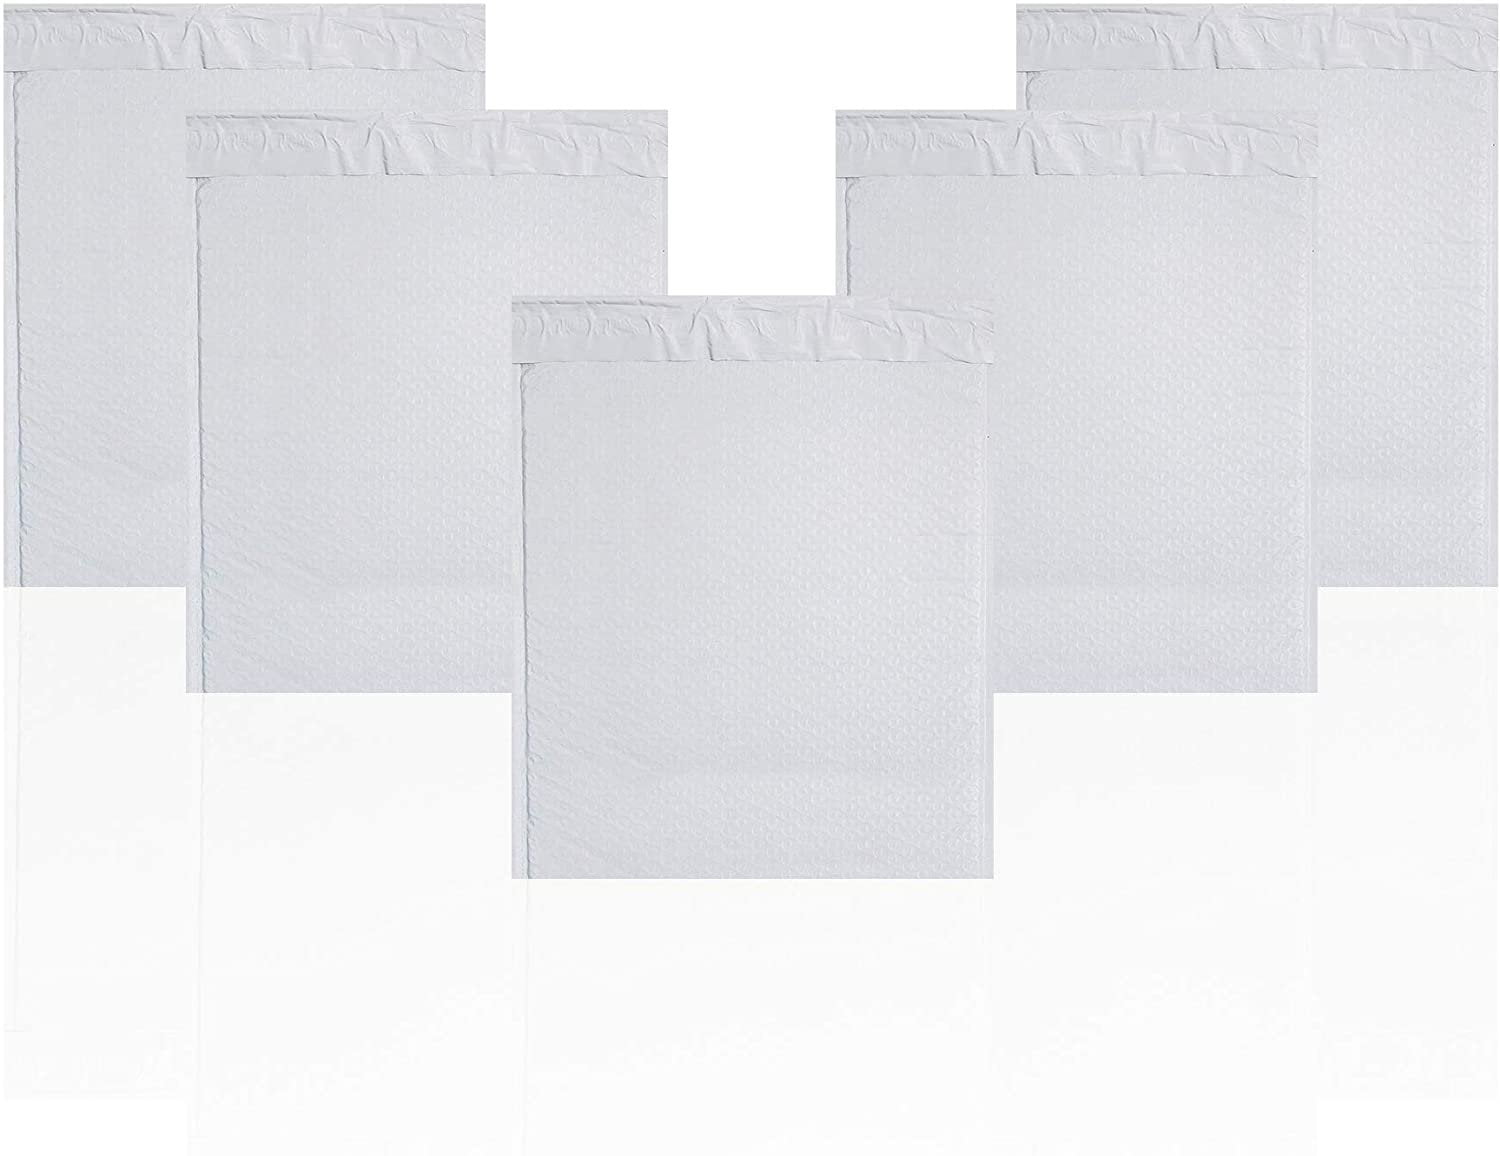 10 x 14" inch White Medium Mailing Bags Extra Strong Seal Post Parcel Packing